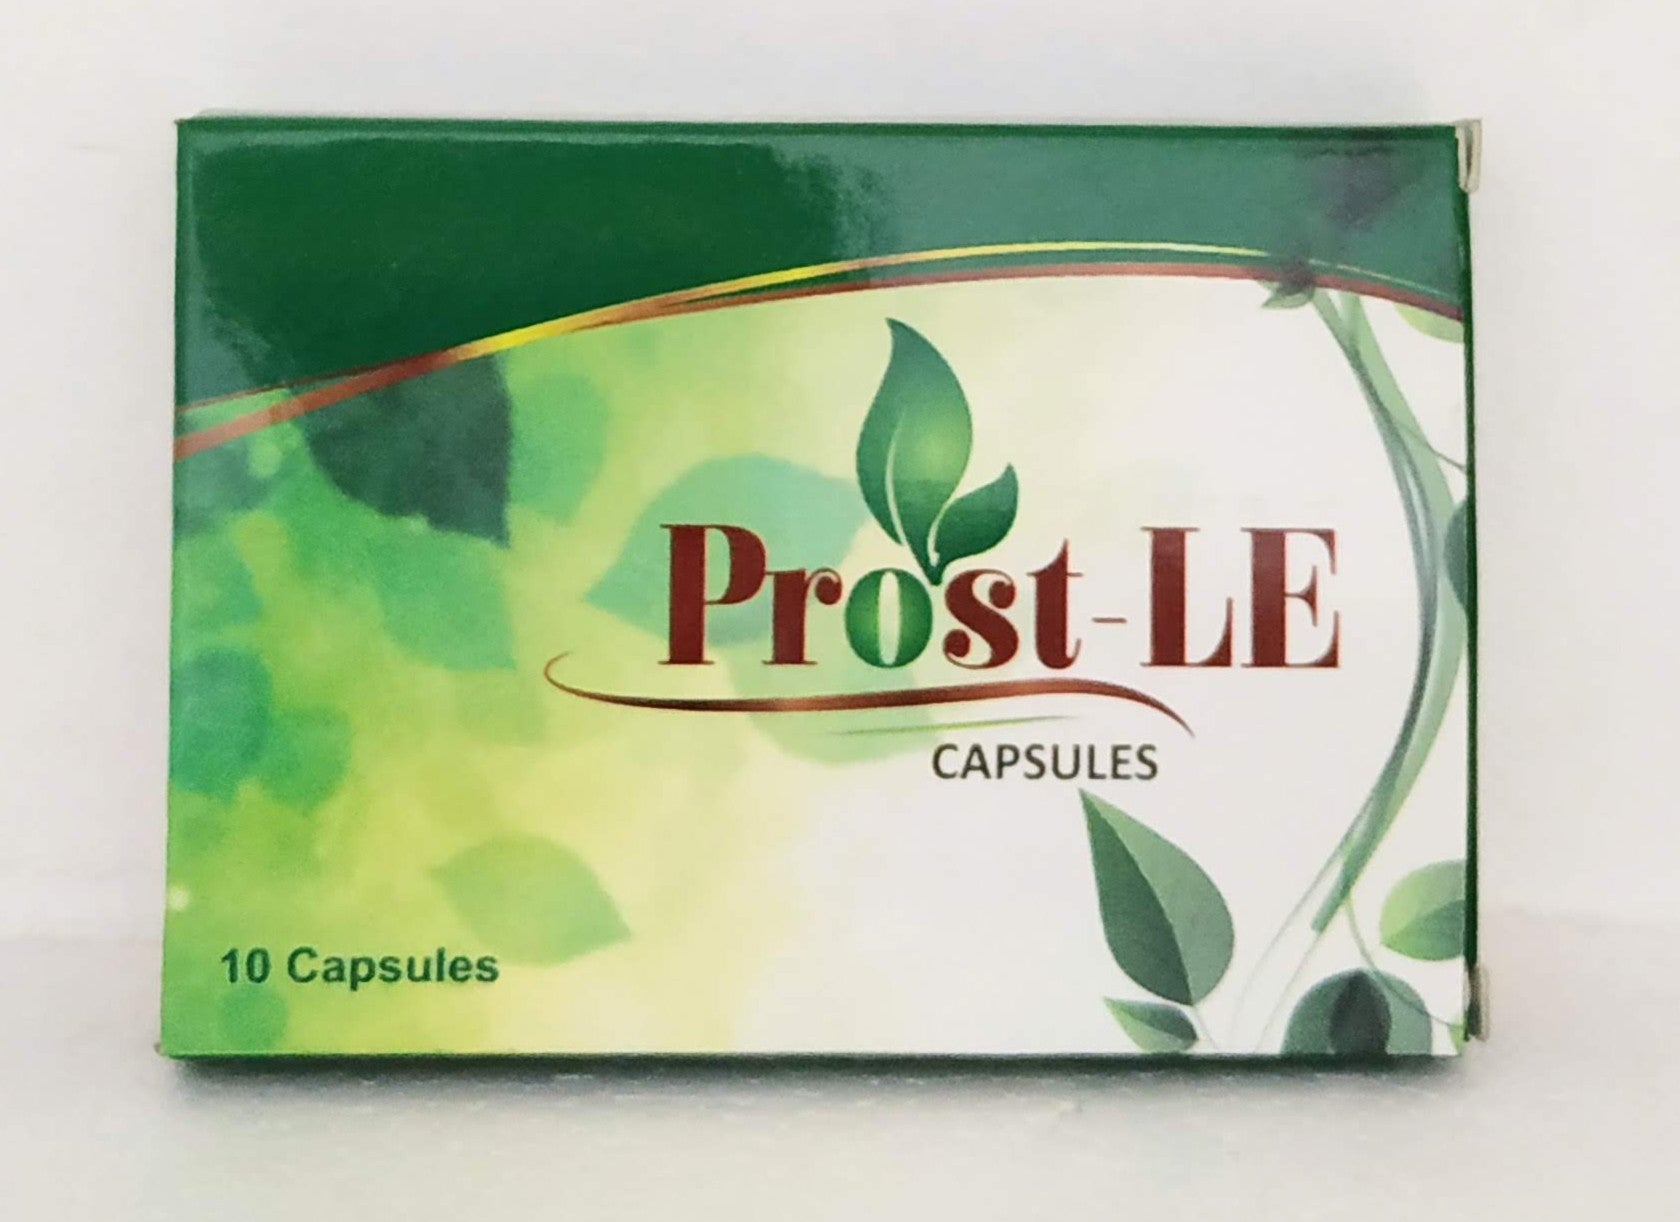 Shop Prost-LE capsules - 10Capsules at price 84.00 from Wintrust Online - Ayush Care